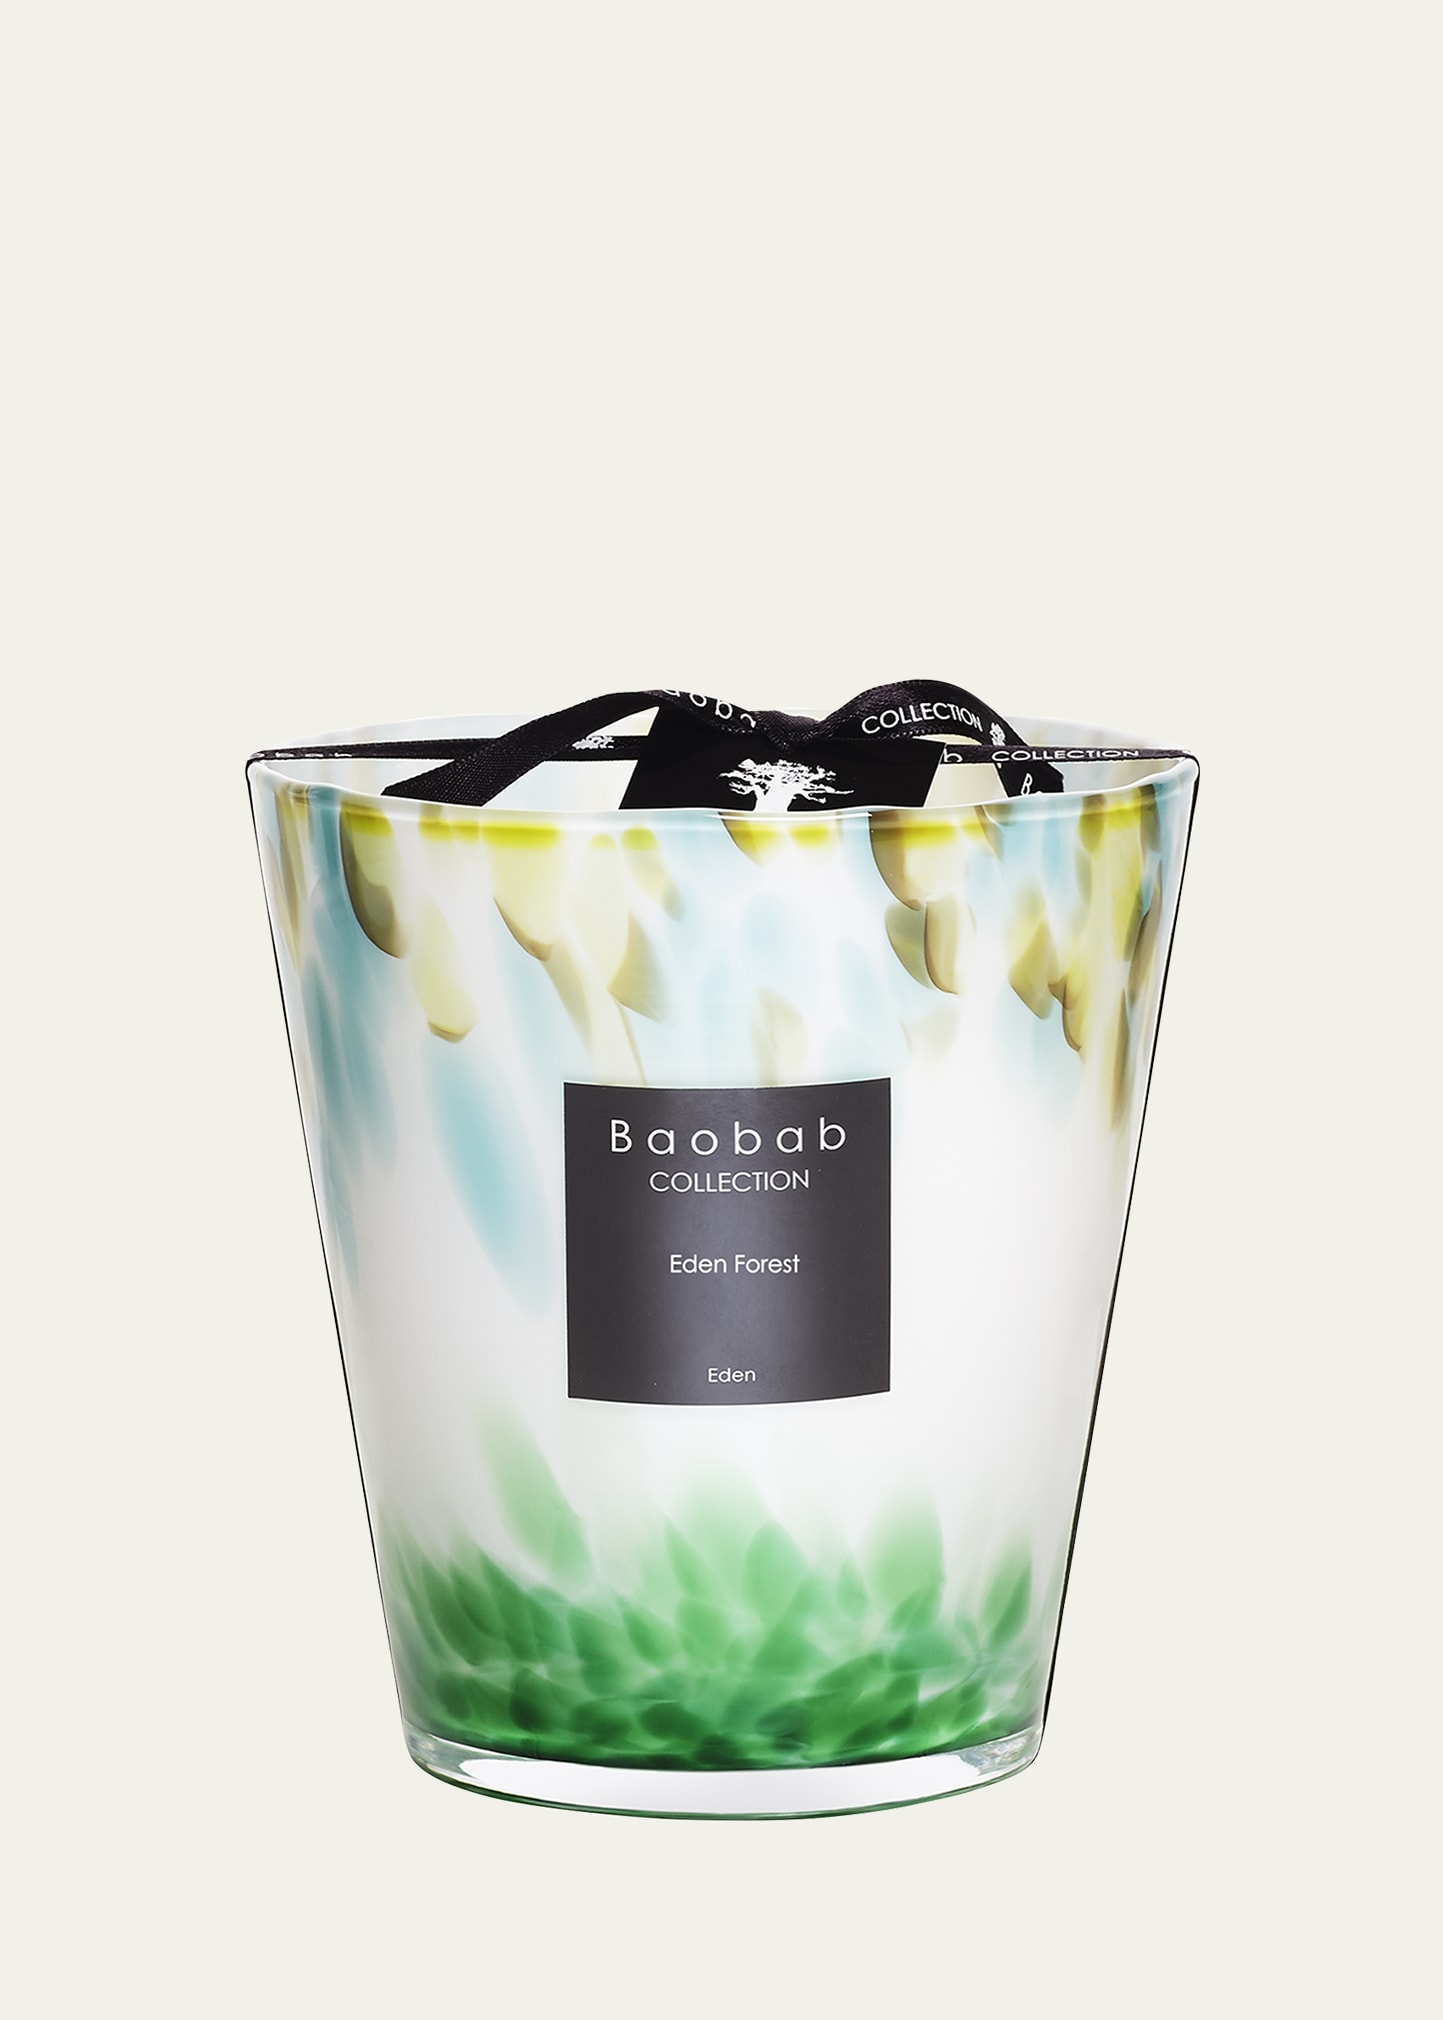 Collection Max 16 Eden Forest Scented - Bergdorf